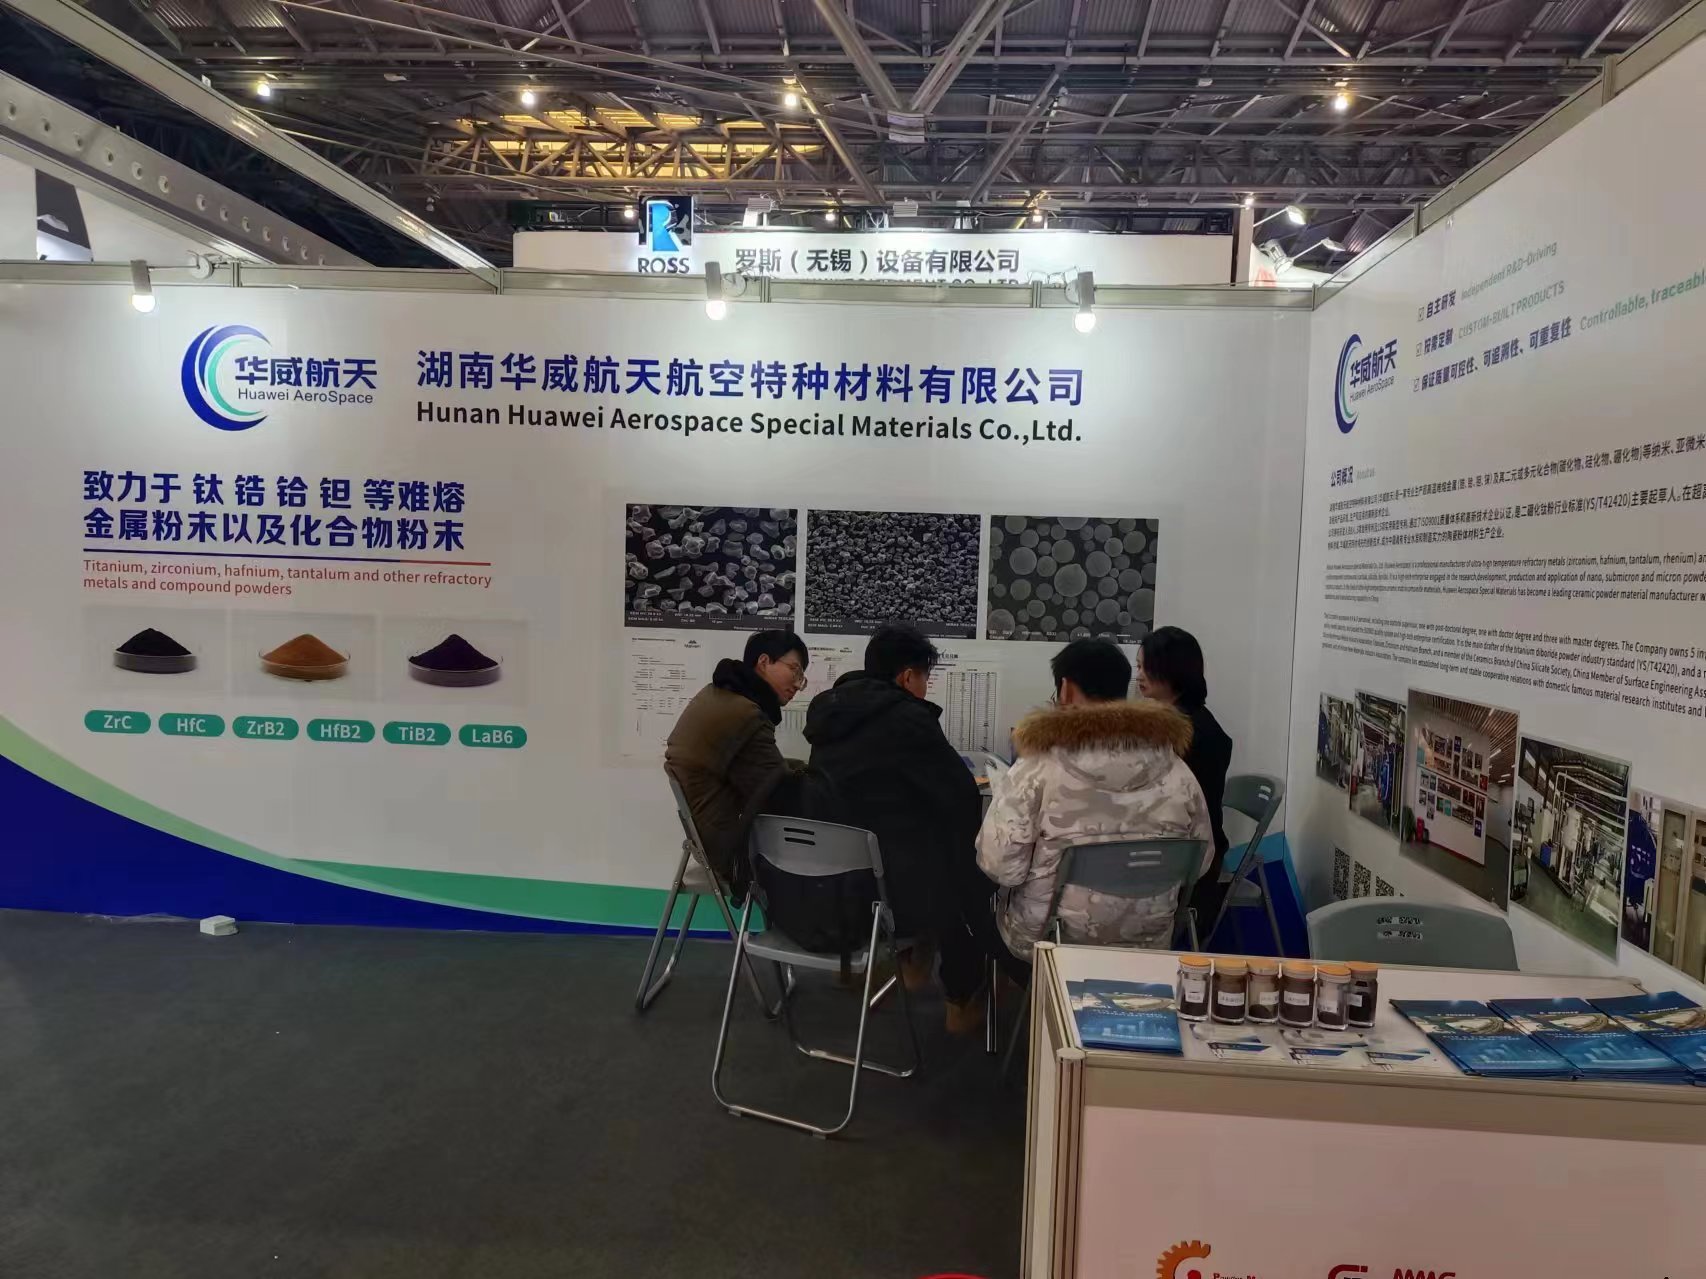 China International Powder Metallurgy and Cemented Carbide Exhibition (PM CHINA).